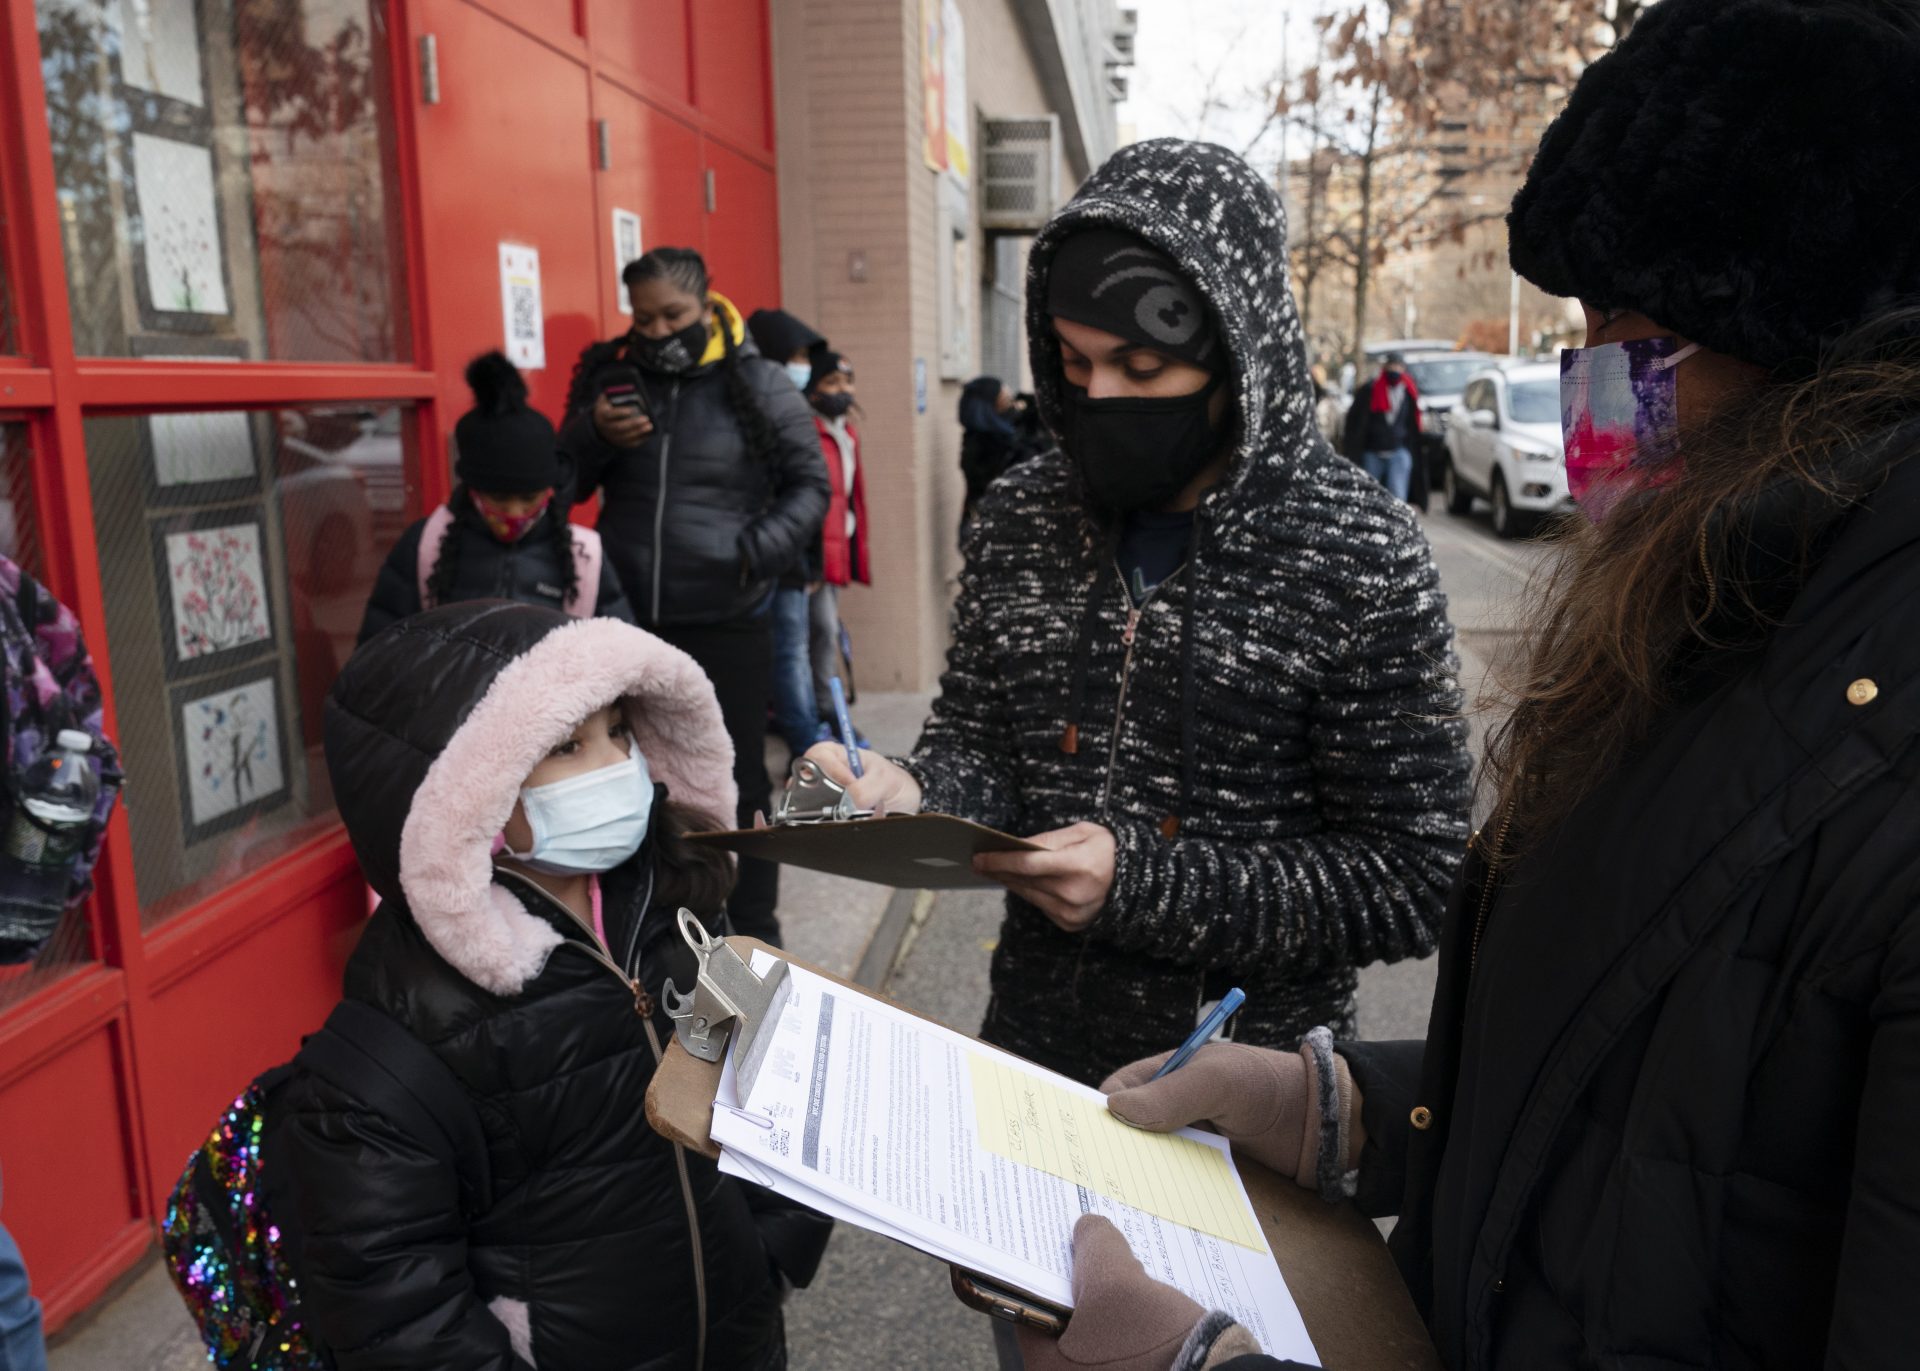 A parent, center, completes a form granting permission for random COVID-19 testing for students as he arrives with his daughter, left, at P.S. 134 Henrietta Szold Elementary School, Monday, Dec. 7, 2020, in New York.